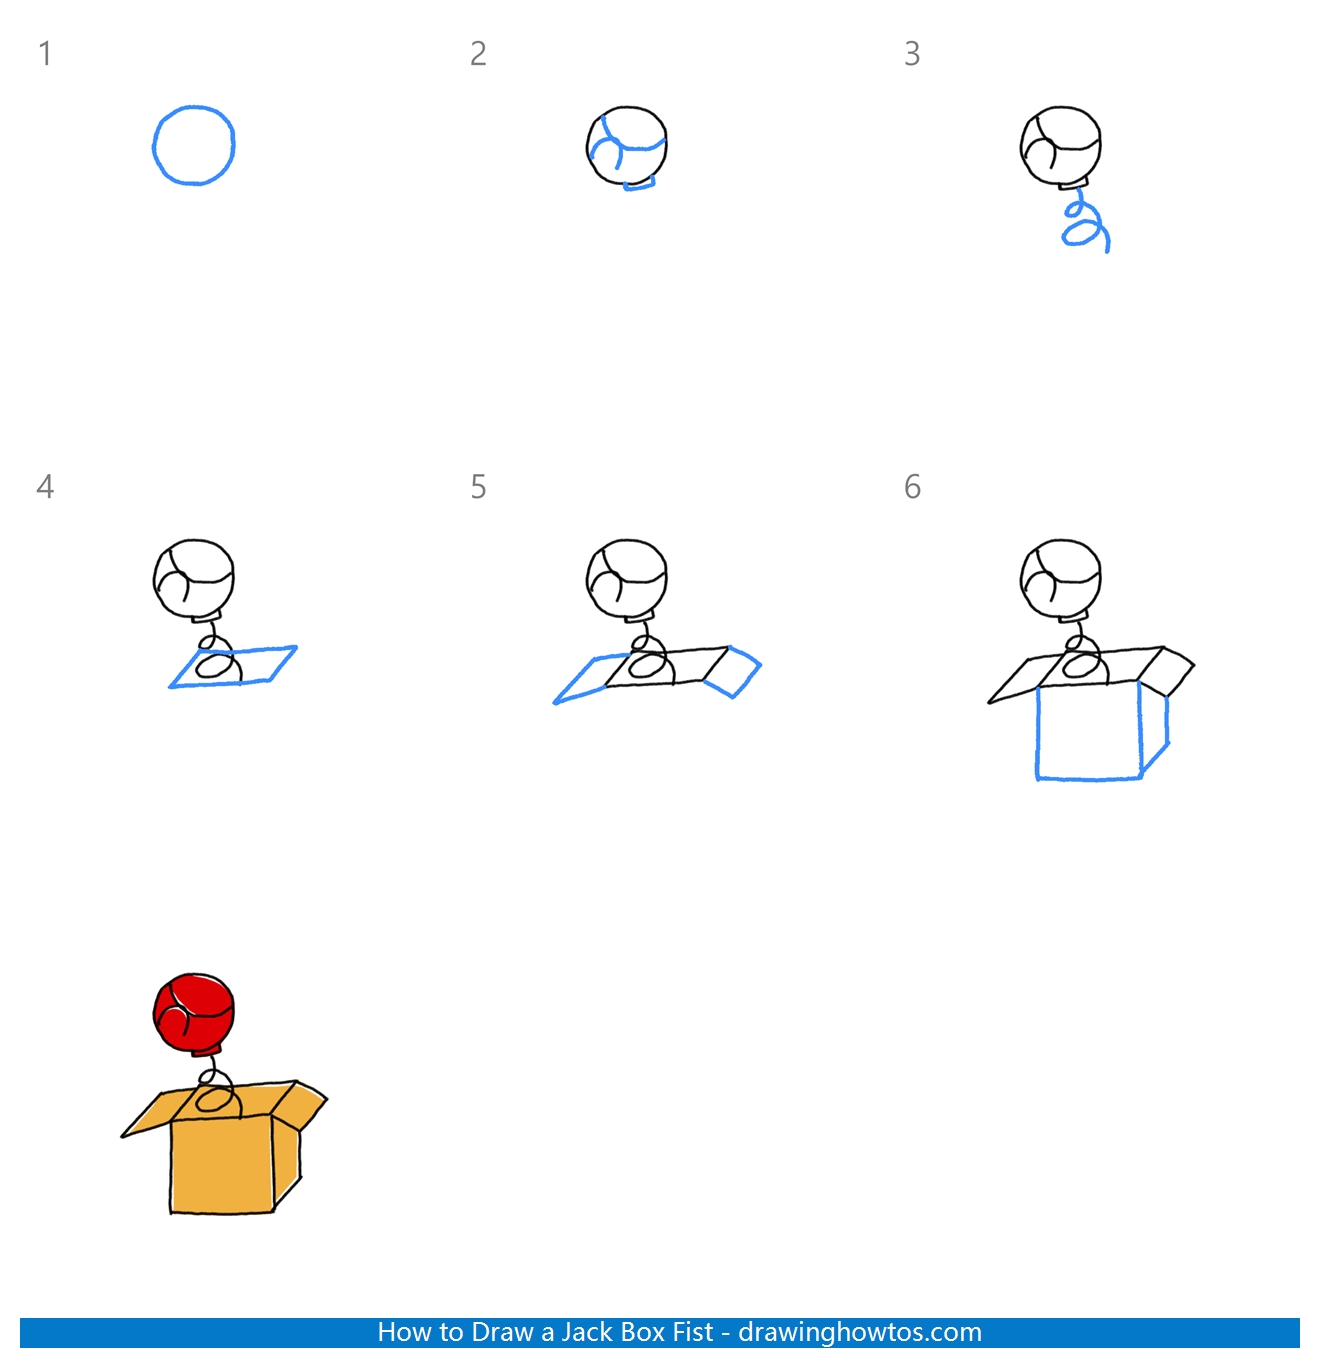 How to Draw a Jack Box Fist Step by Step